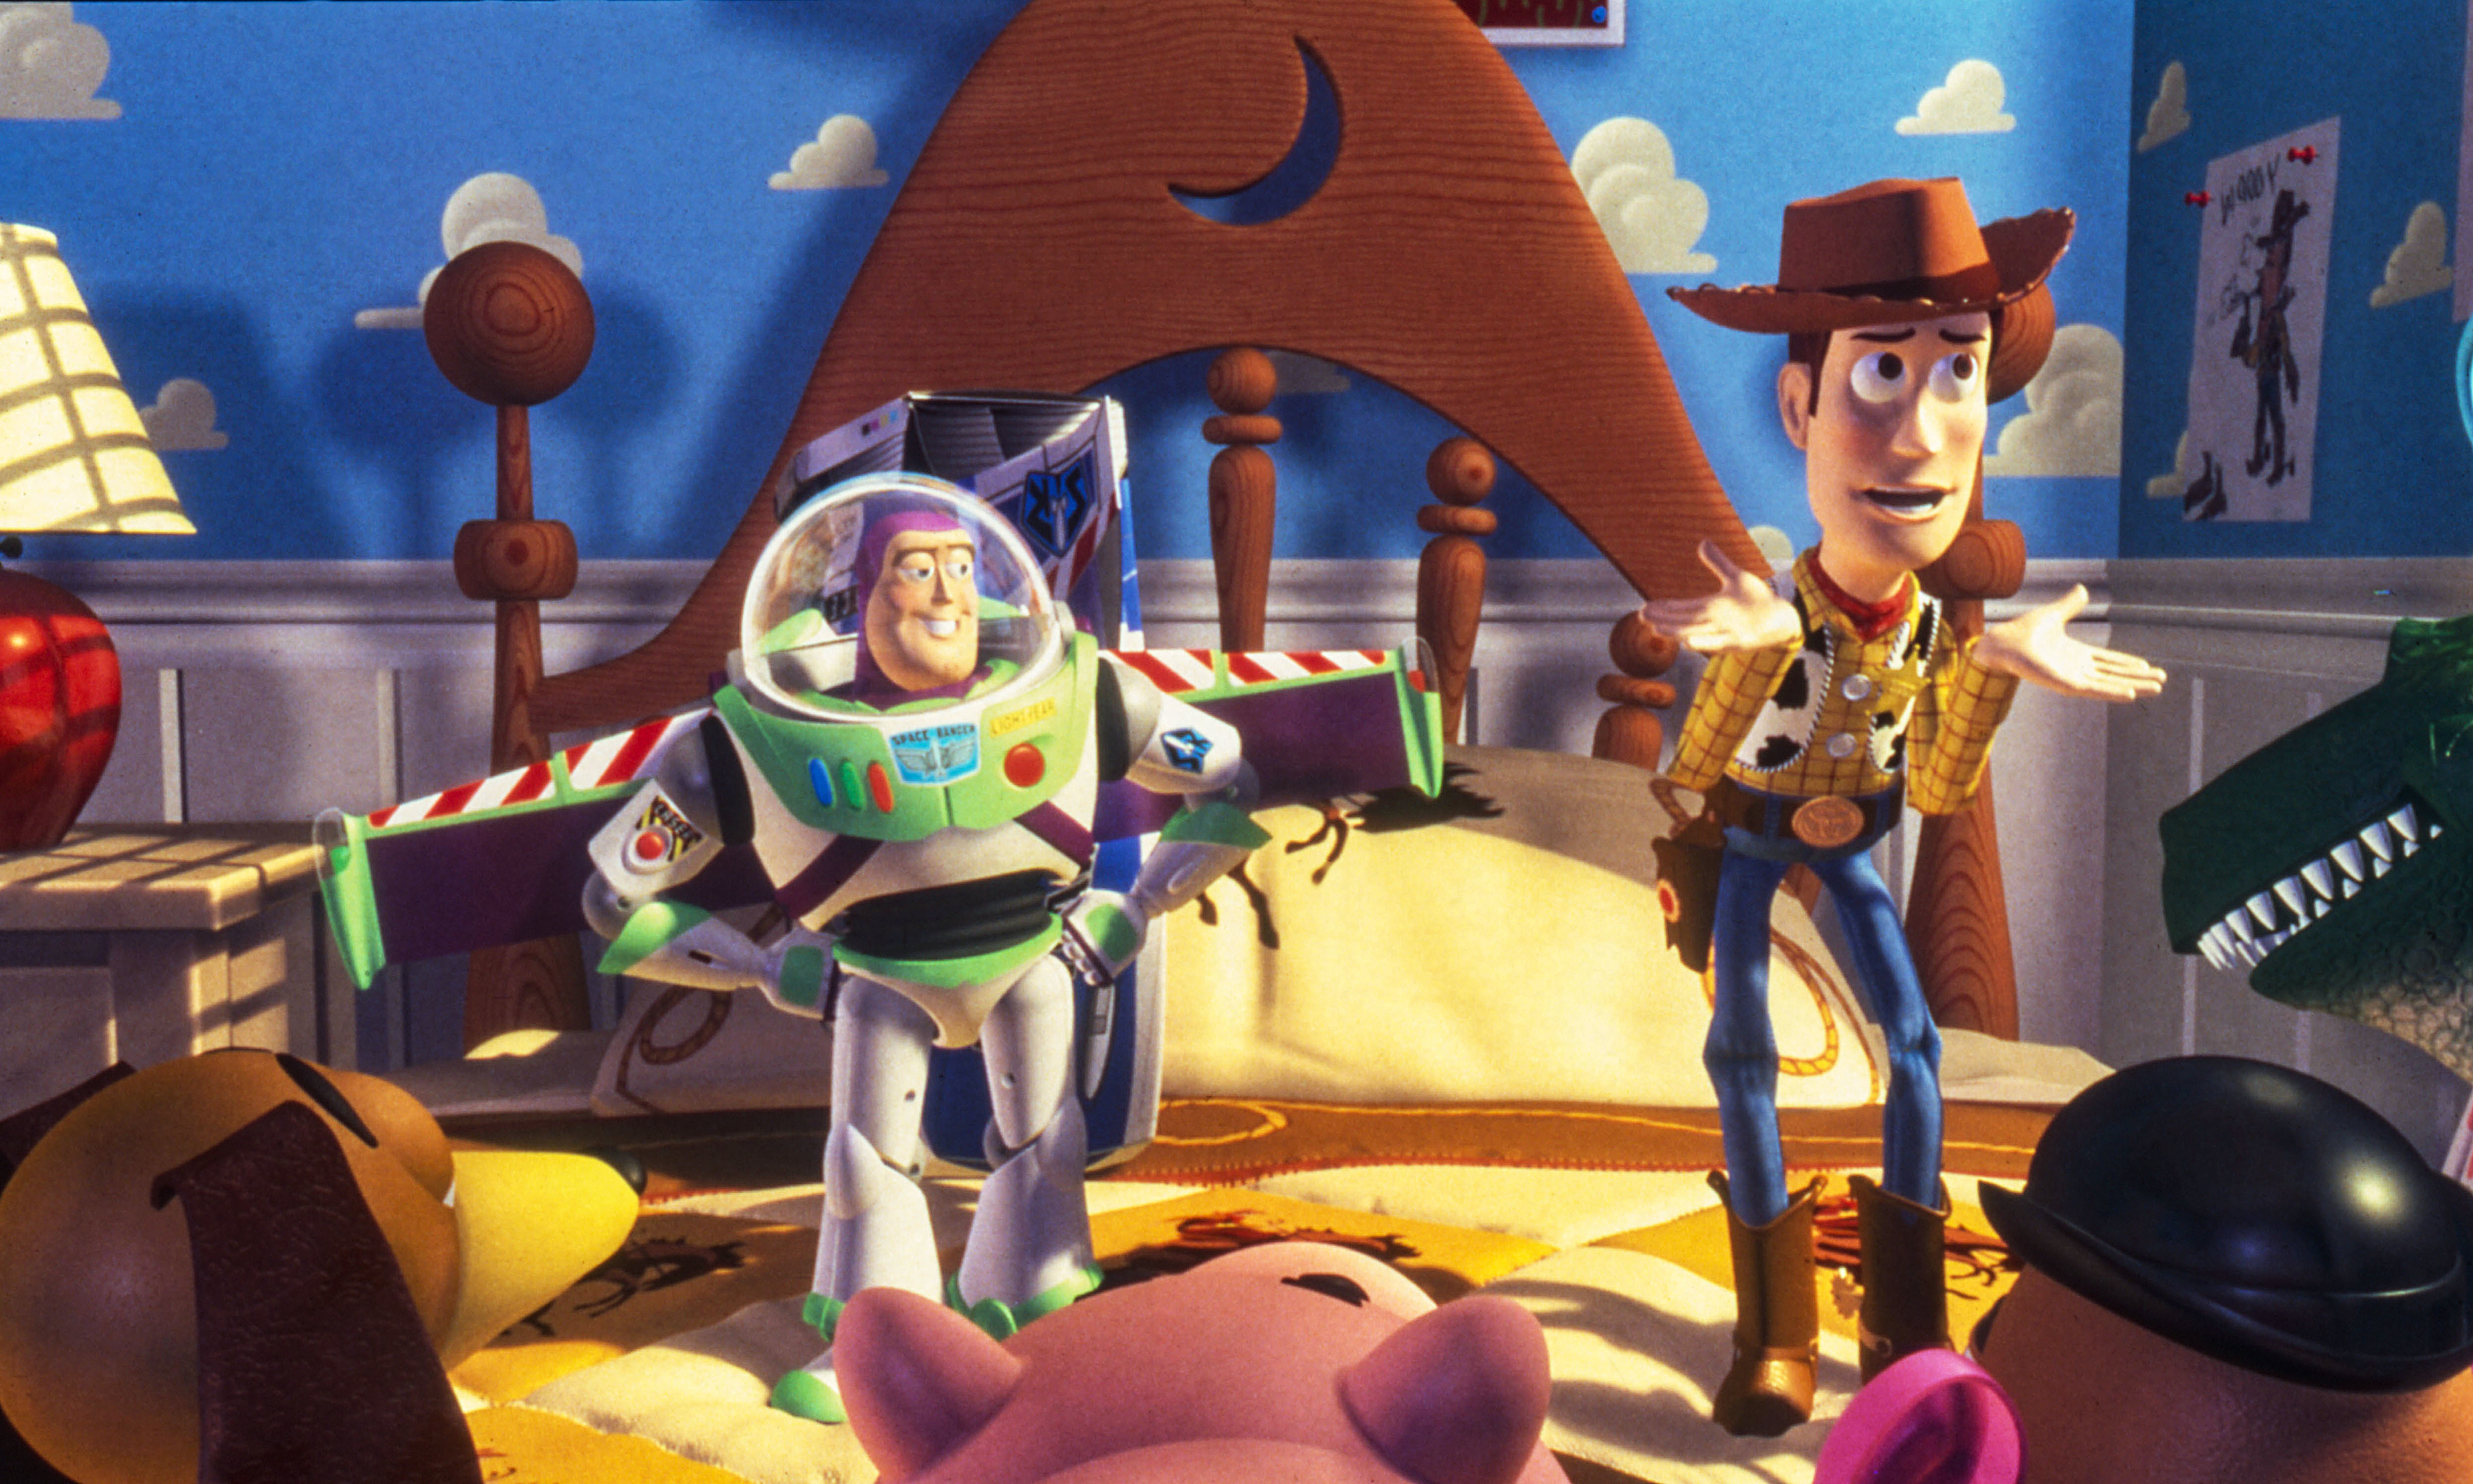 Buzz Lightyear and Woody from Toy Story stand in a cartoon room with toys. Buzz is wearing a space suit; Woody is in a cowboy outfit